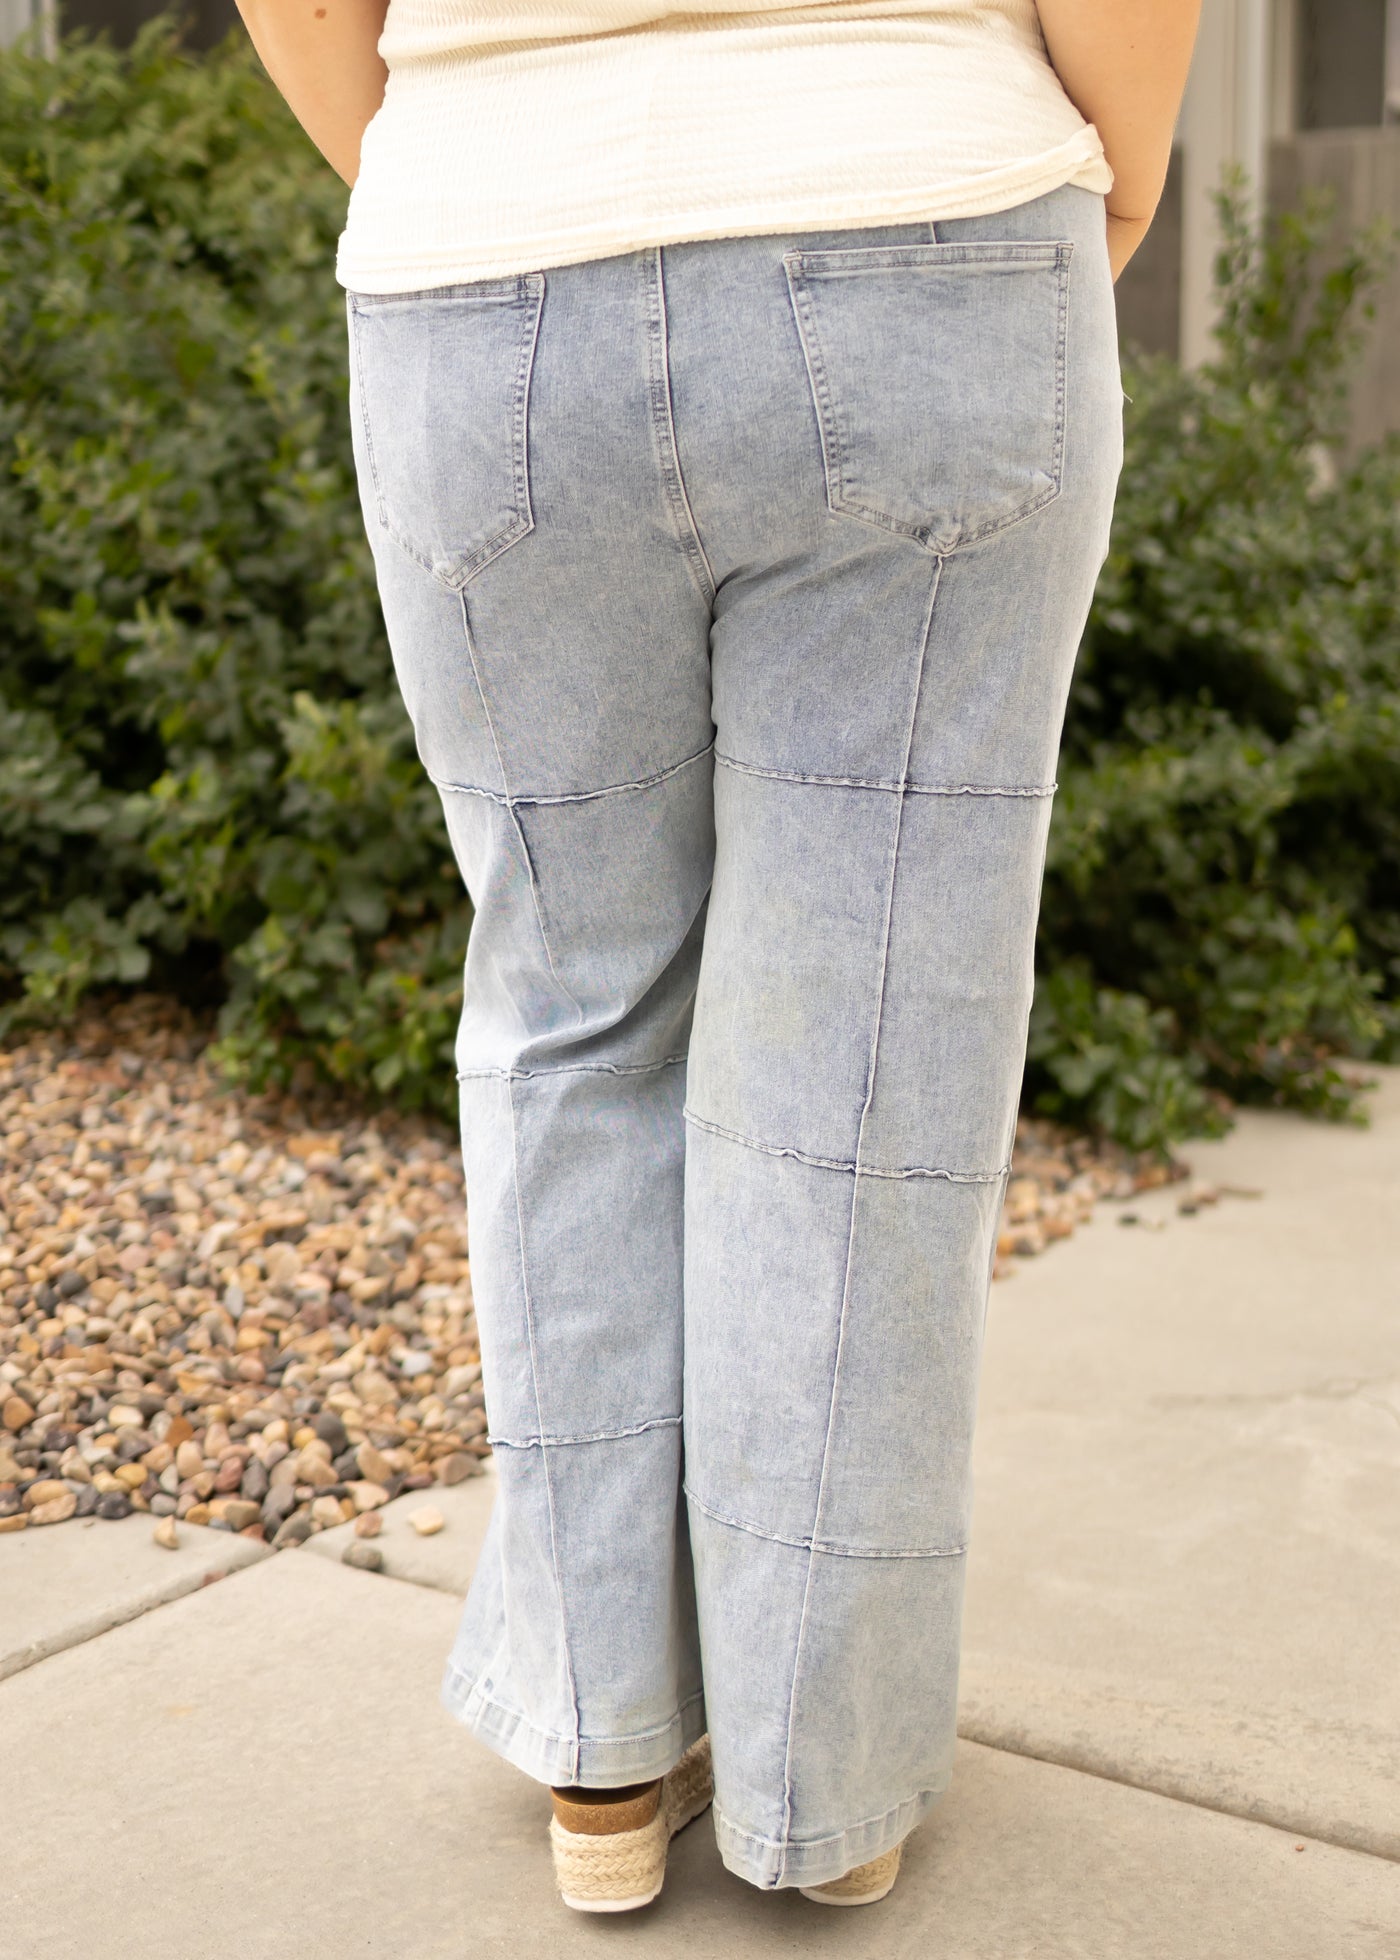 Back view of plus size light denim jeans with outside patchwork stitching